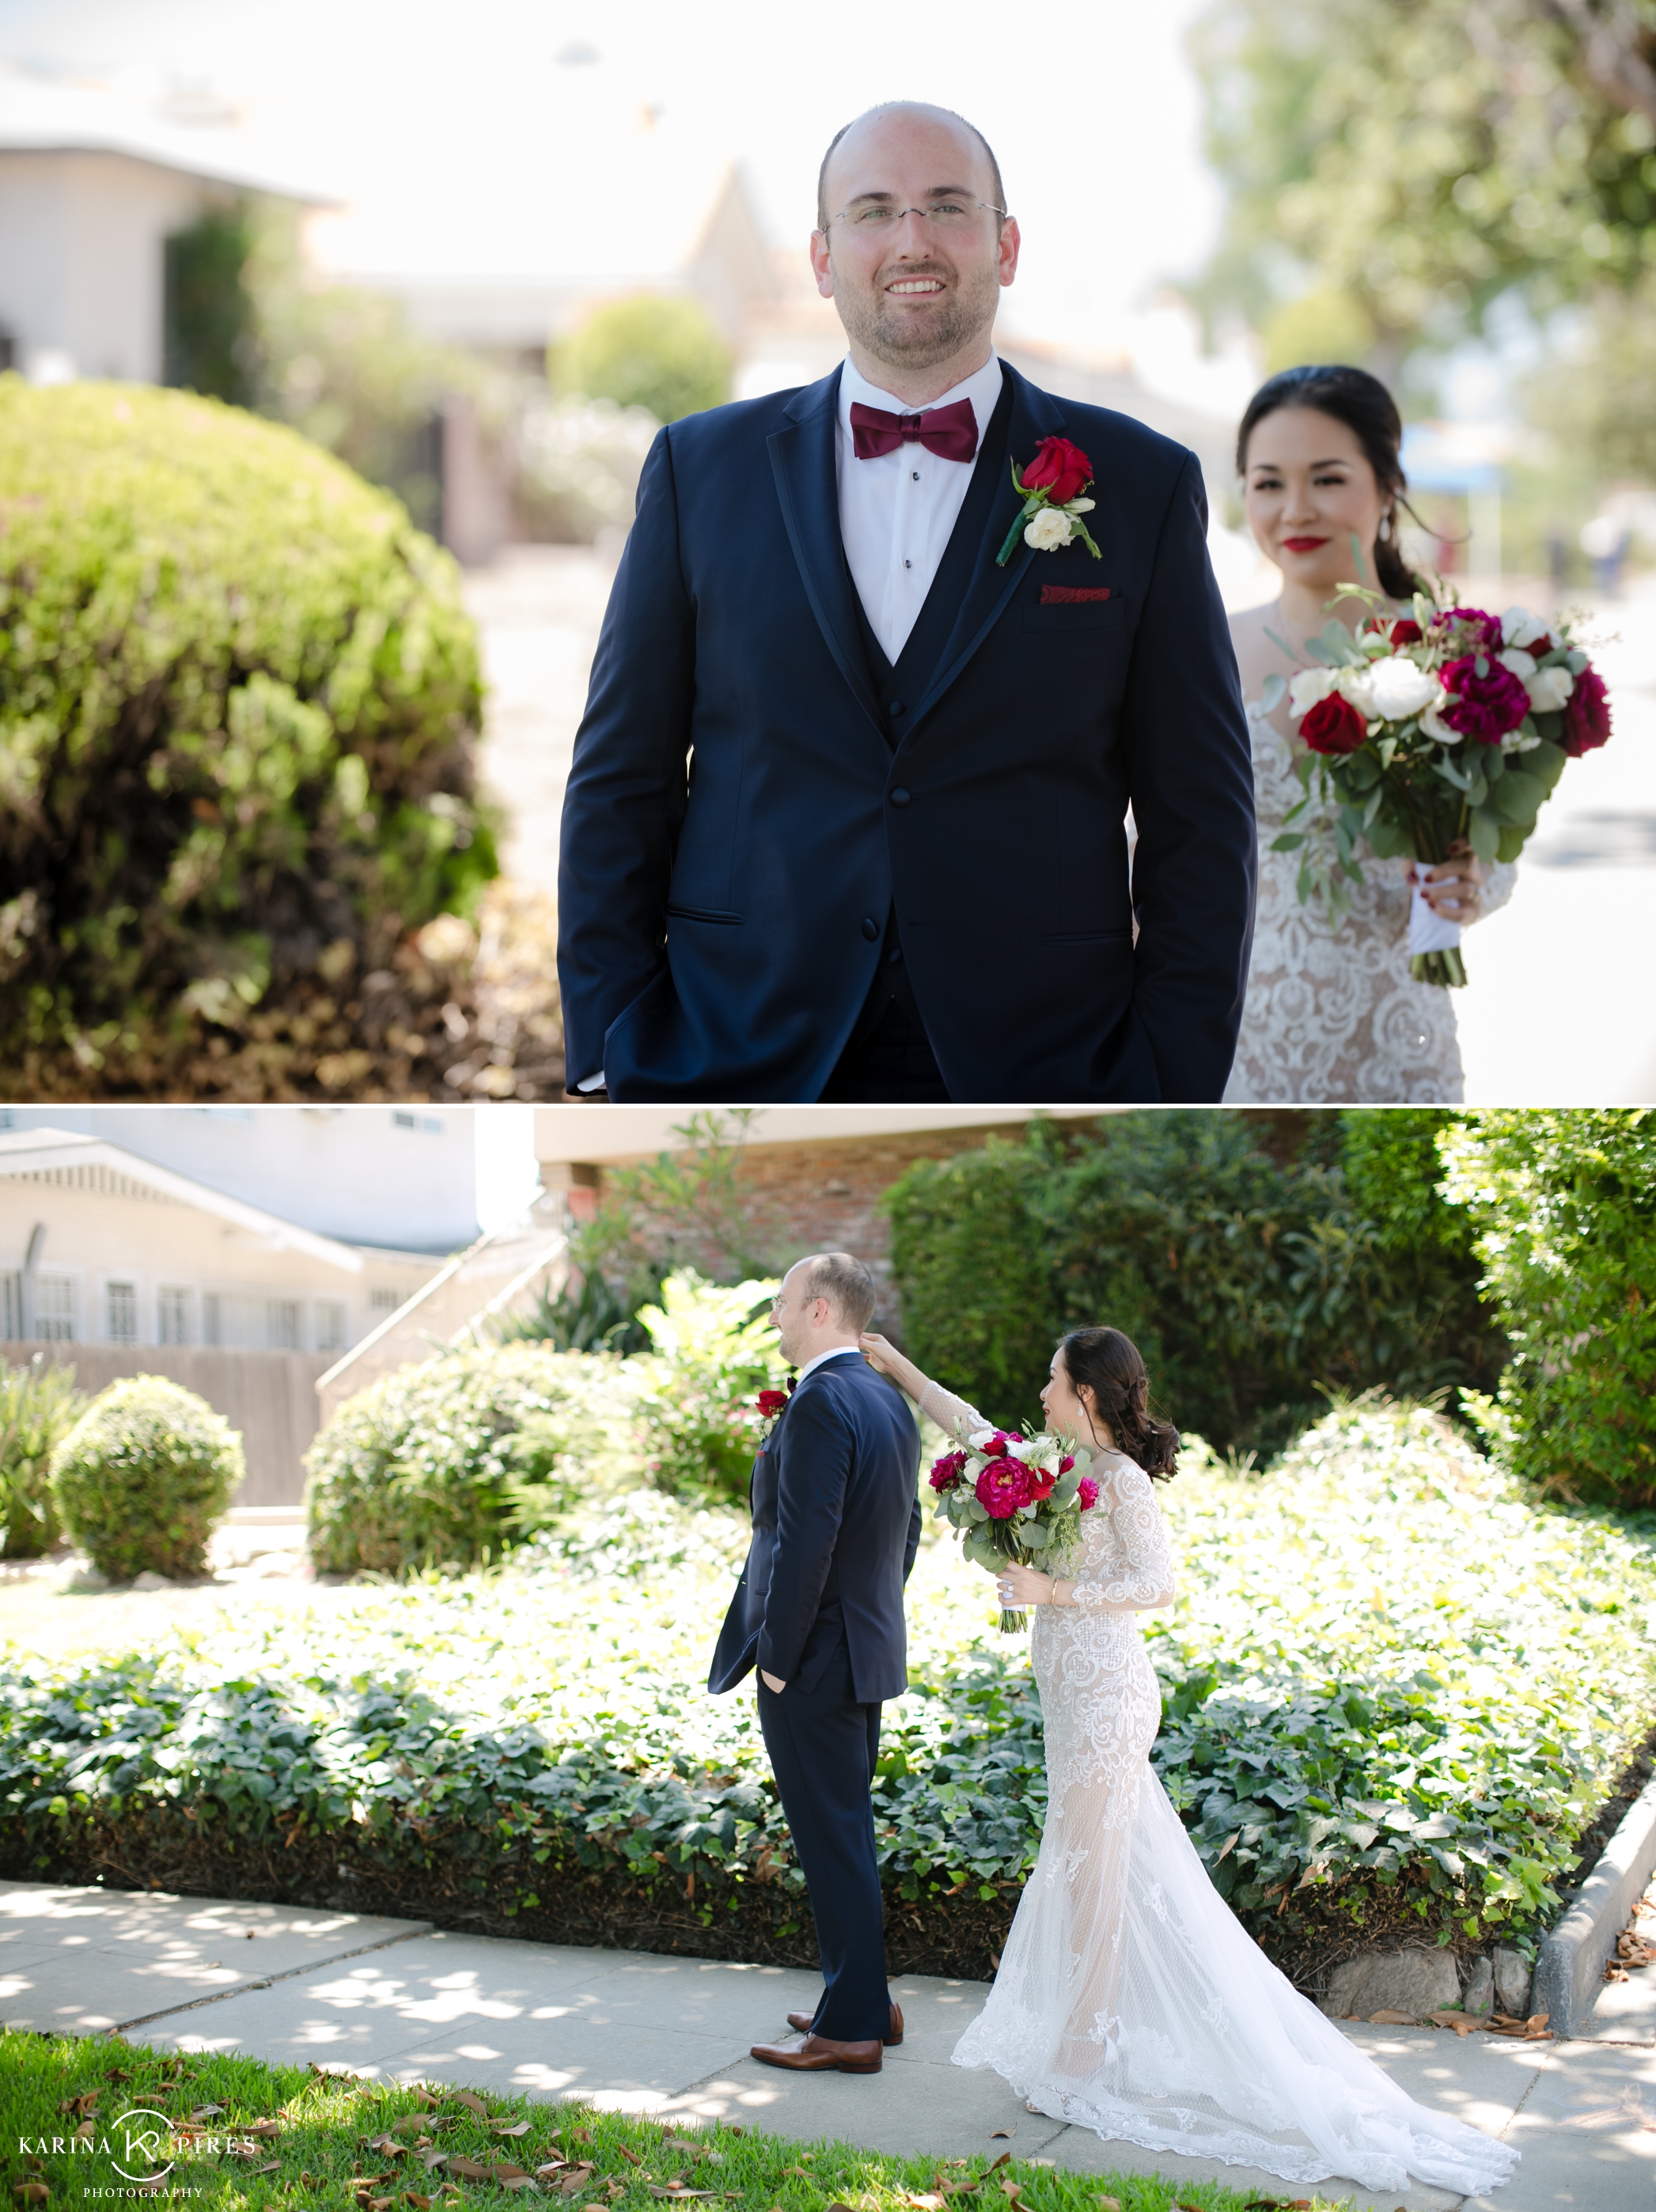 Nini and Jeffrey’s Summer Wedding in Los Angeles with burgundy bridal party and flowers